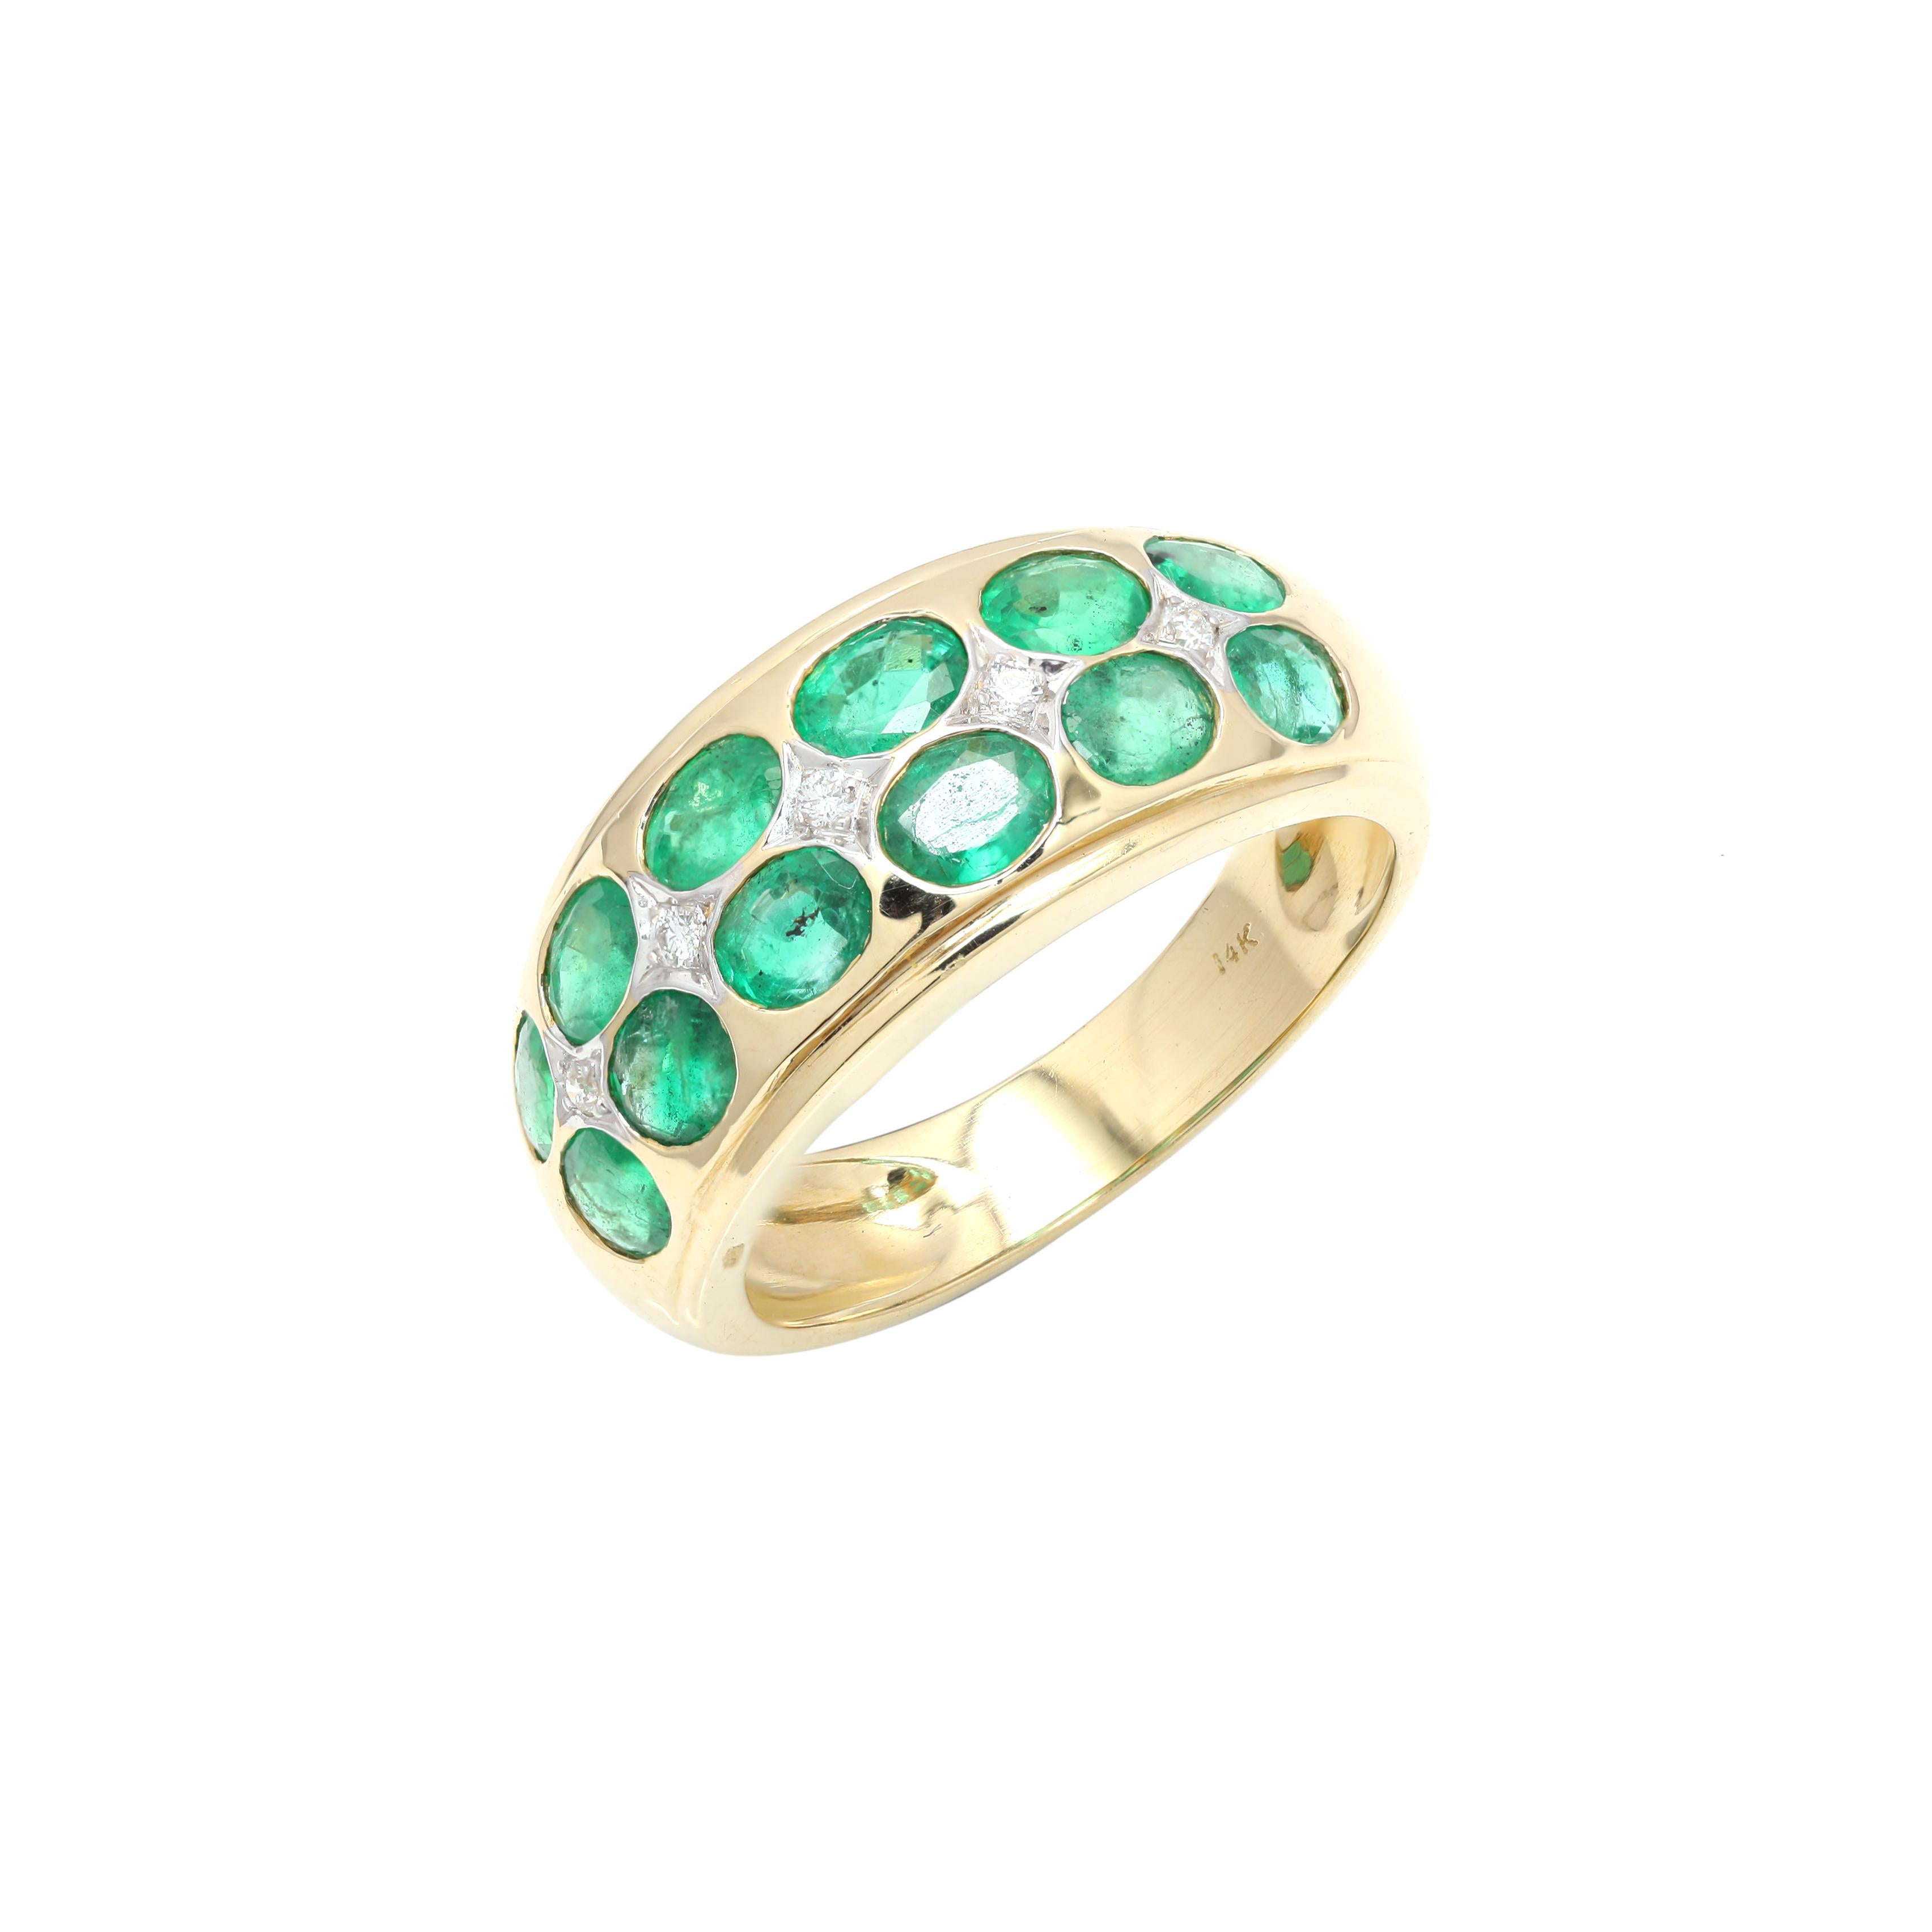 For Sale:  Natural 2.3 ct Emerald Band Ring with Diamonds Inlaid in 14K Yellow Gold 5